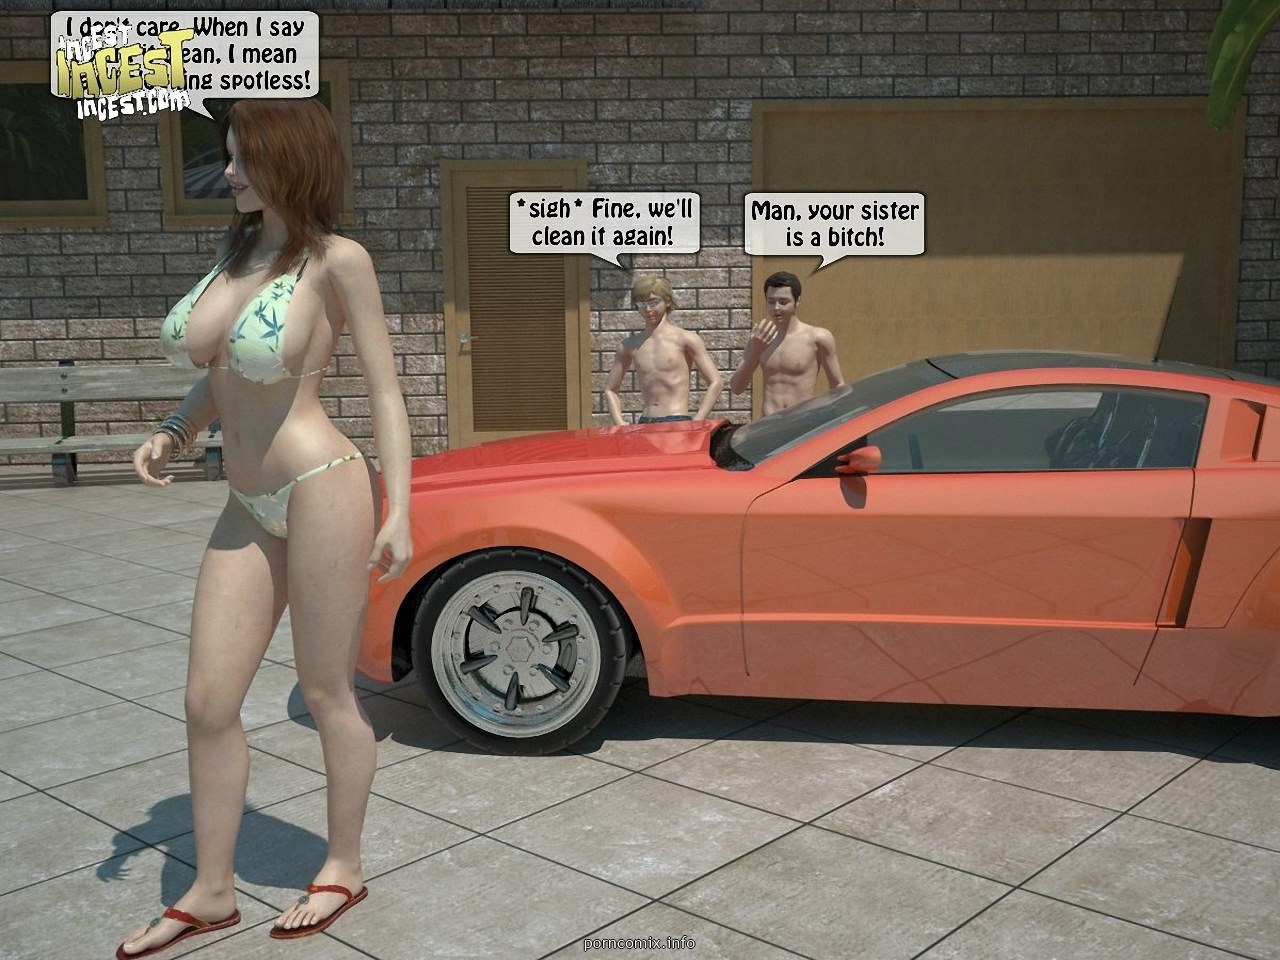 1280px x 960px - brother-sister-u2019s-car comic image 05